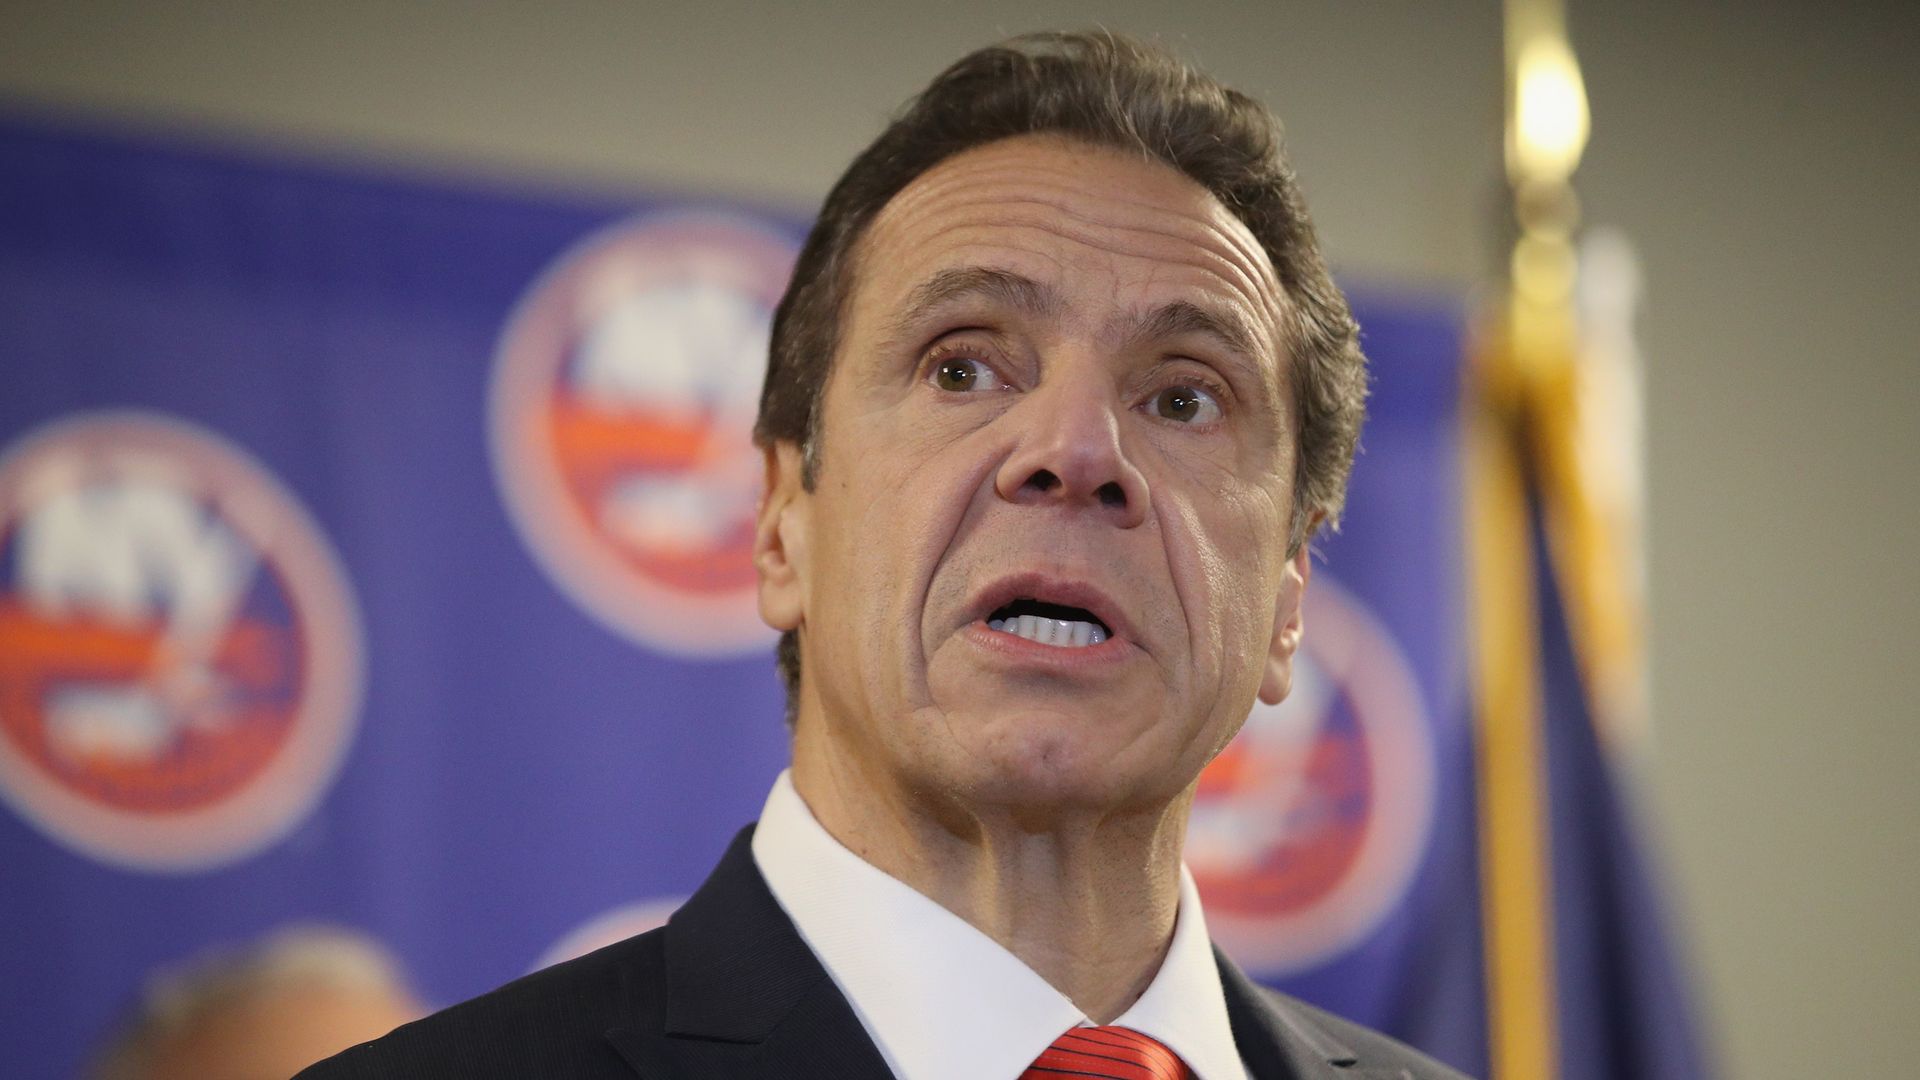 New York Governor Andrew Cuomo announces that the New York Islanders will play at the Nassau Coliseum 